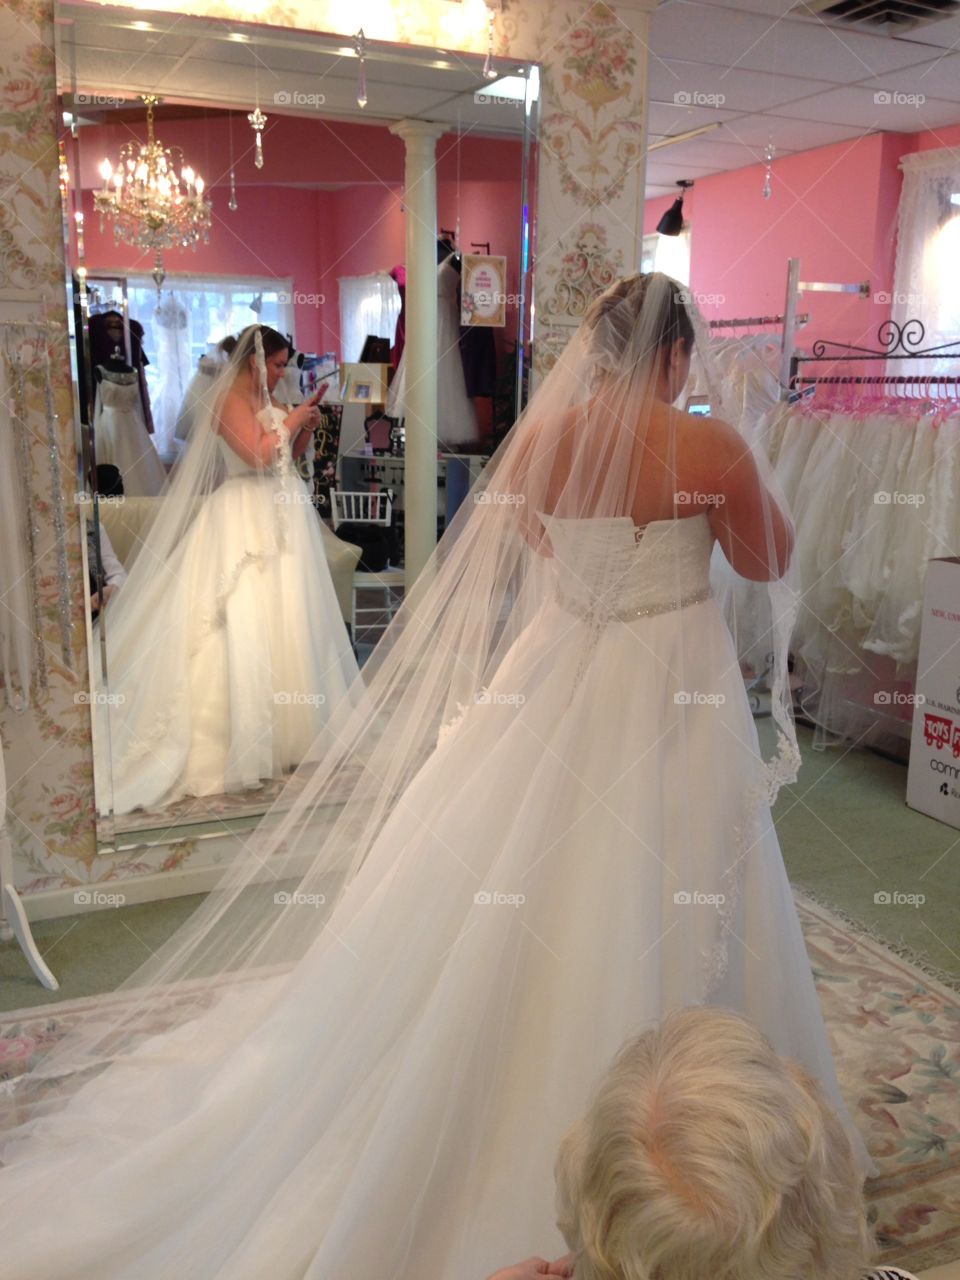 Trying on bridal gowns with veil